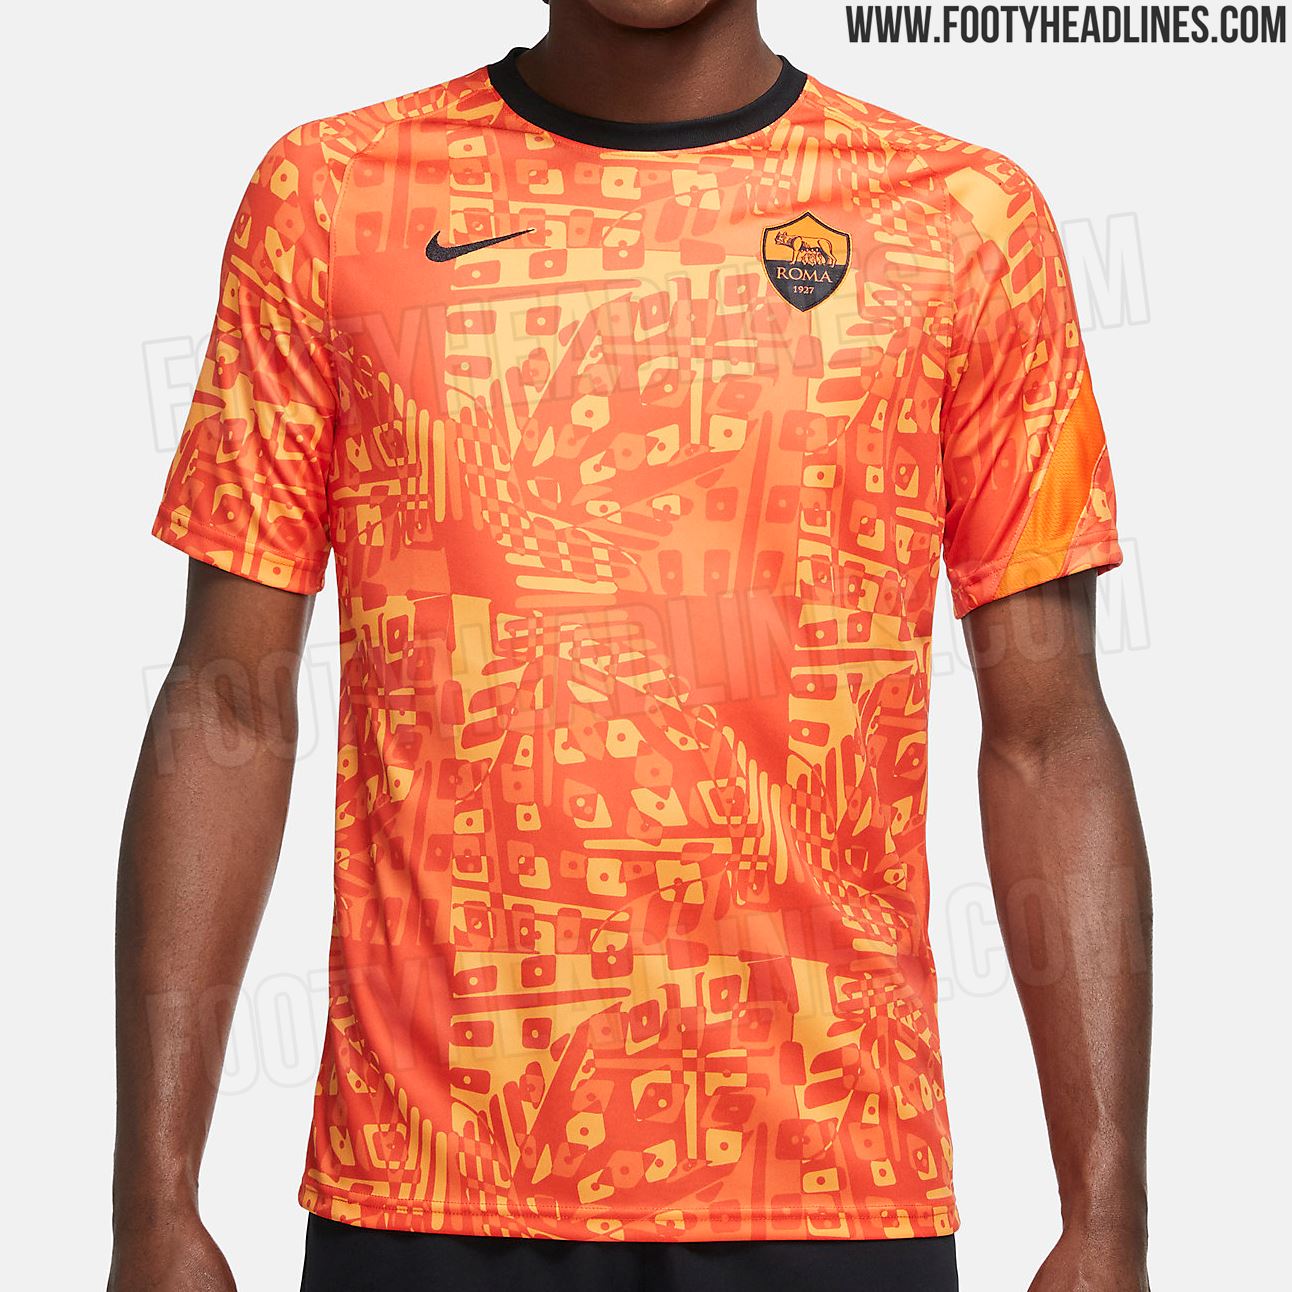 Outstanding Nike 20-21 Champions League Pre-Match Shirts Released ...